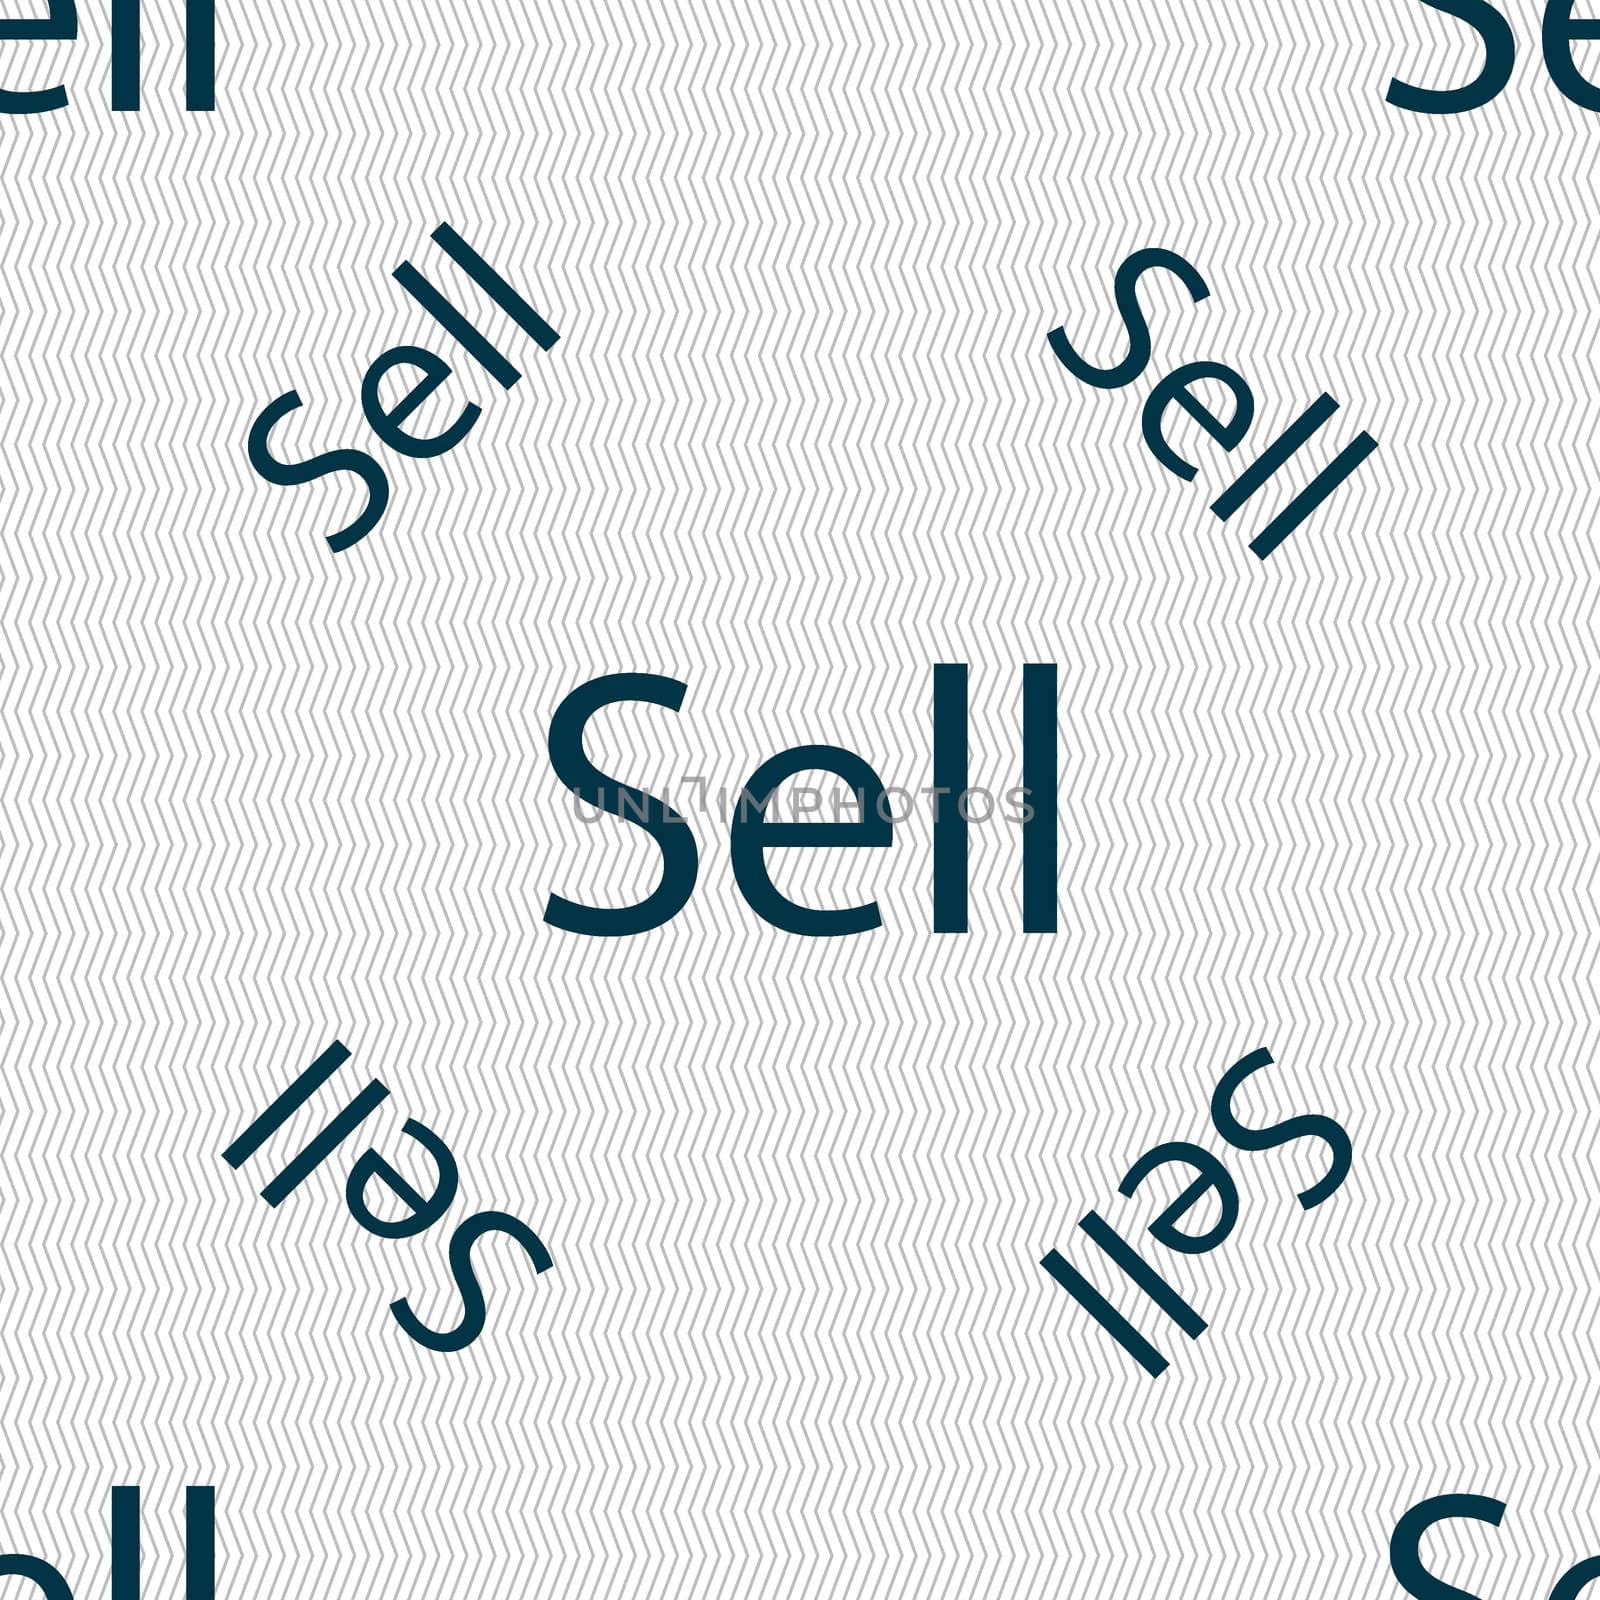 Sell sign icon. Contributor earnings button. Seamless pattern with geometric texture. illustration